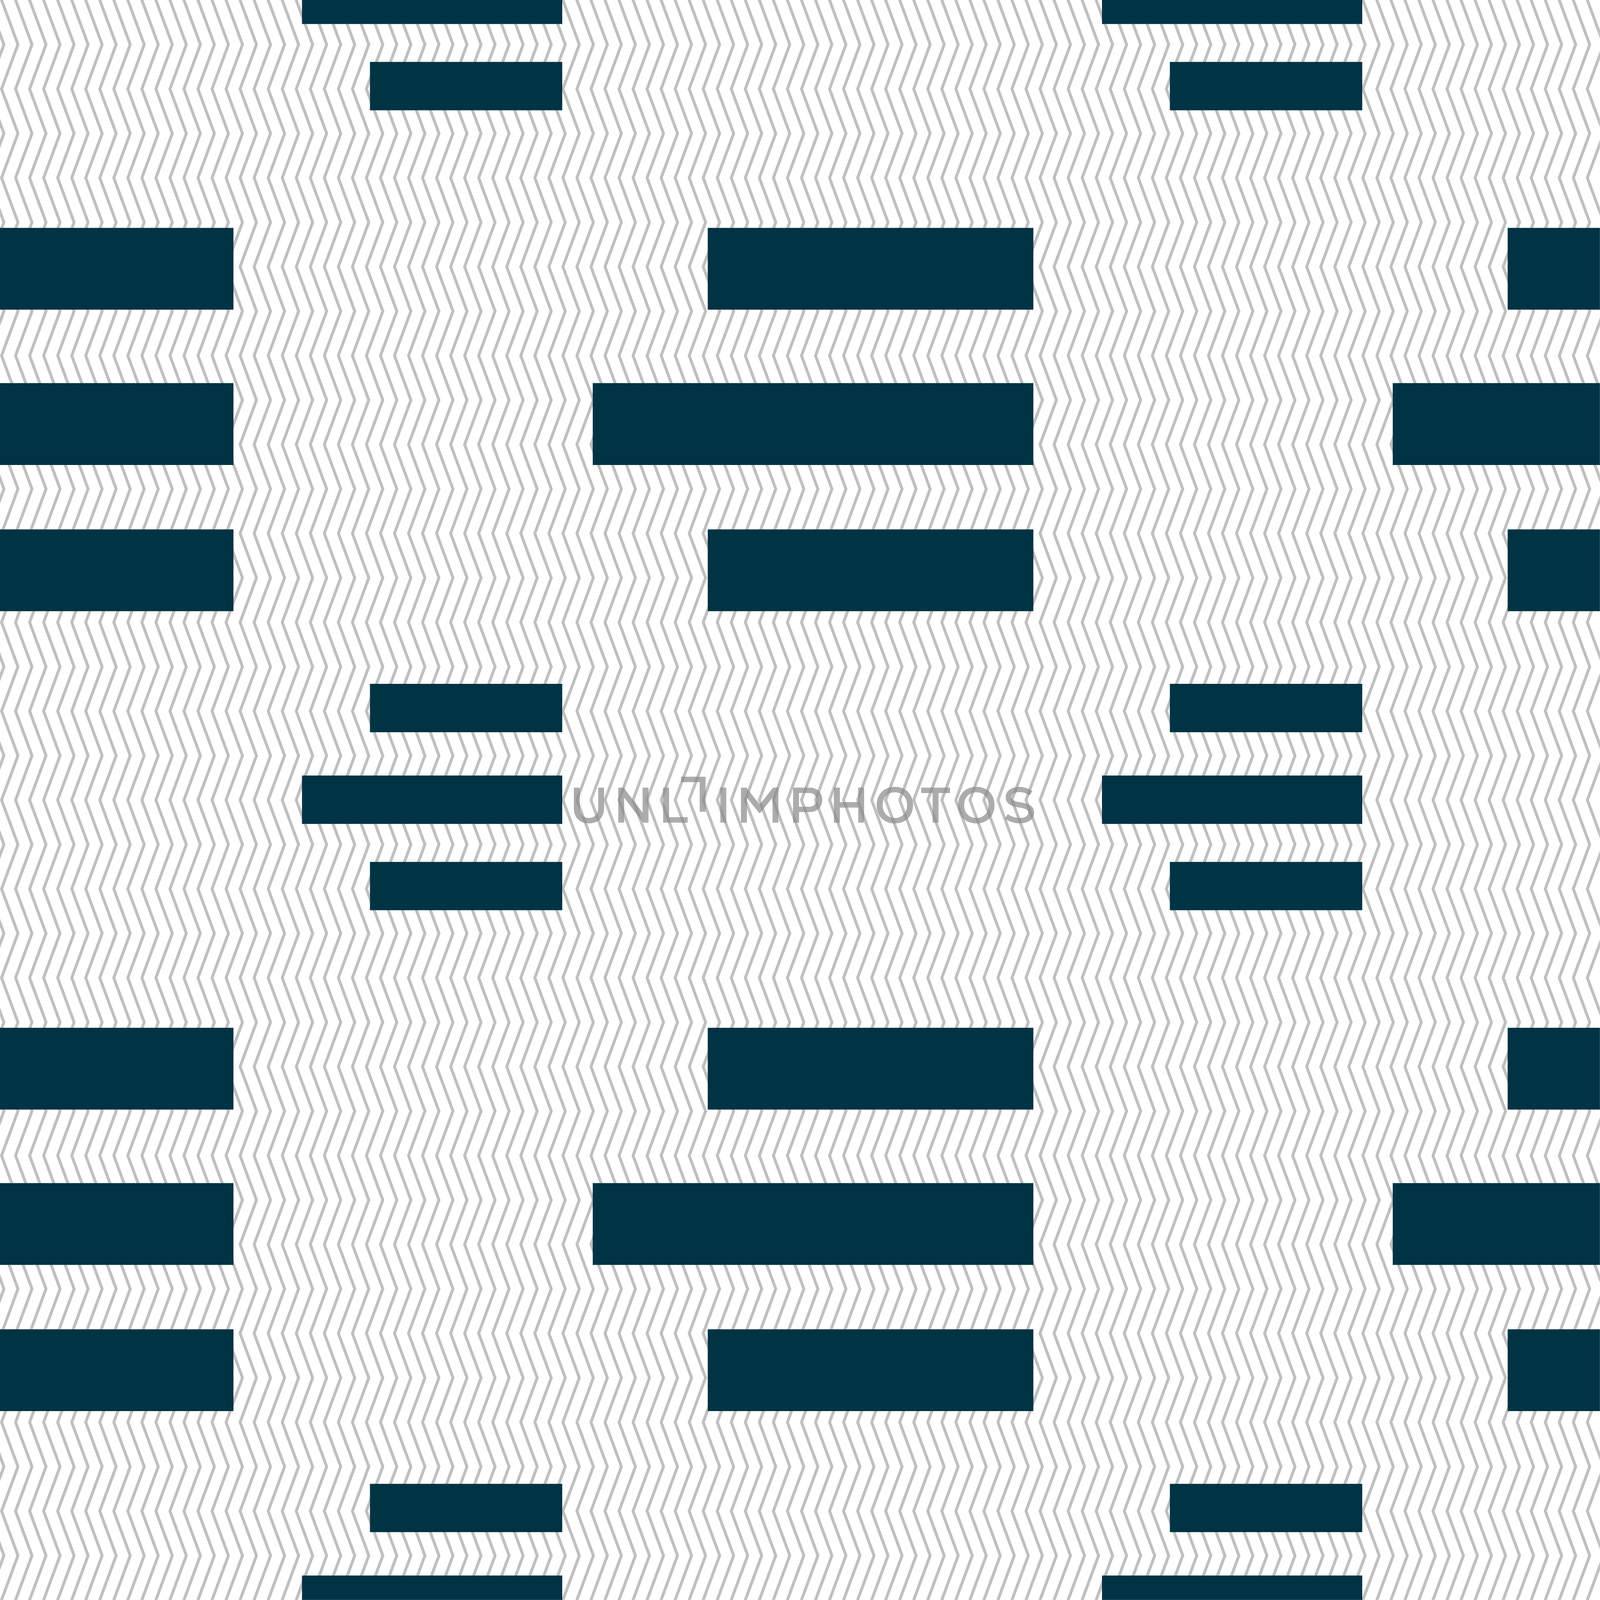 Right-aligned icon sign. Seamless pattern with geometric texture. illustration